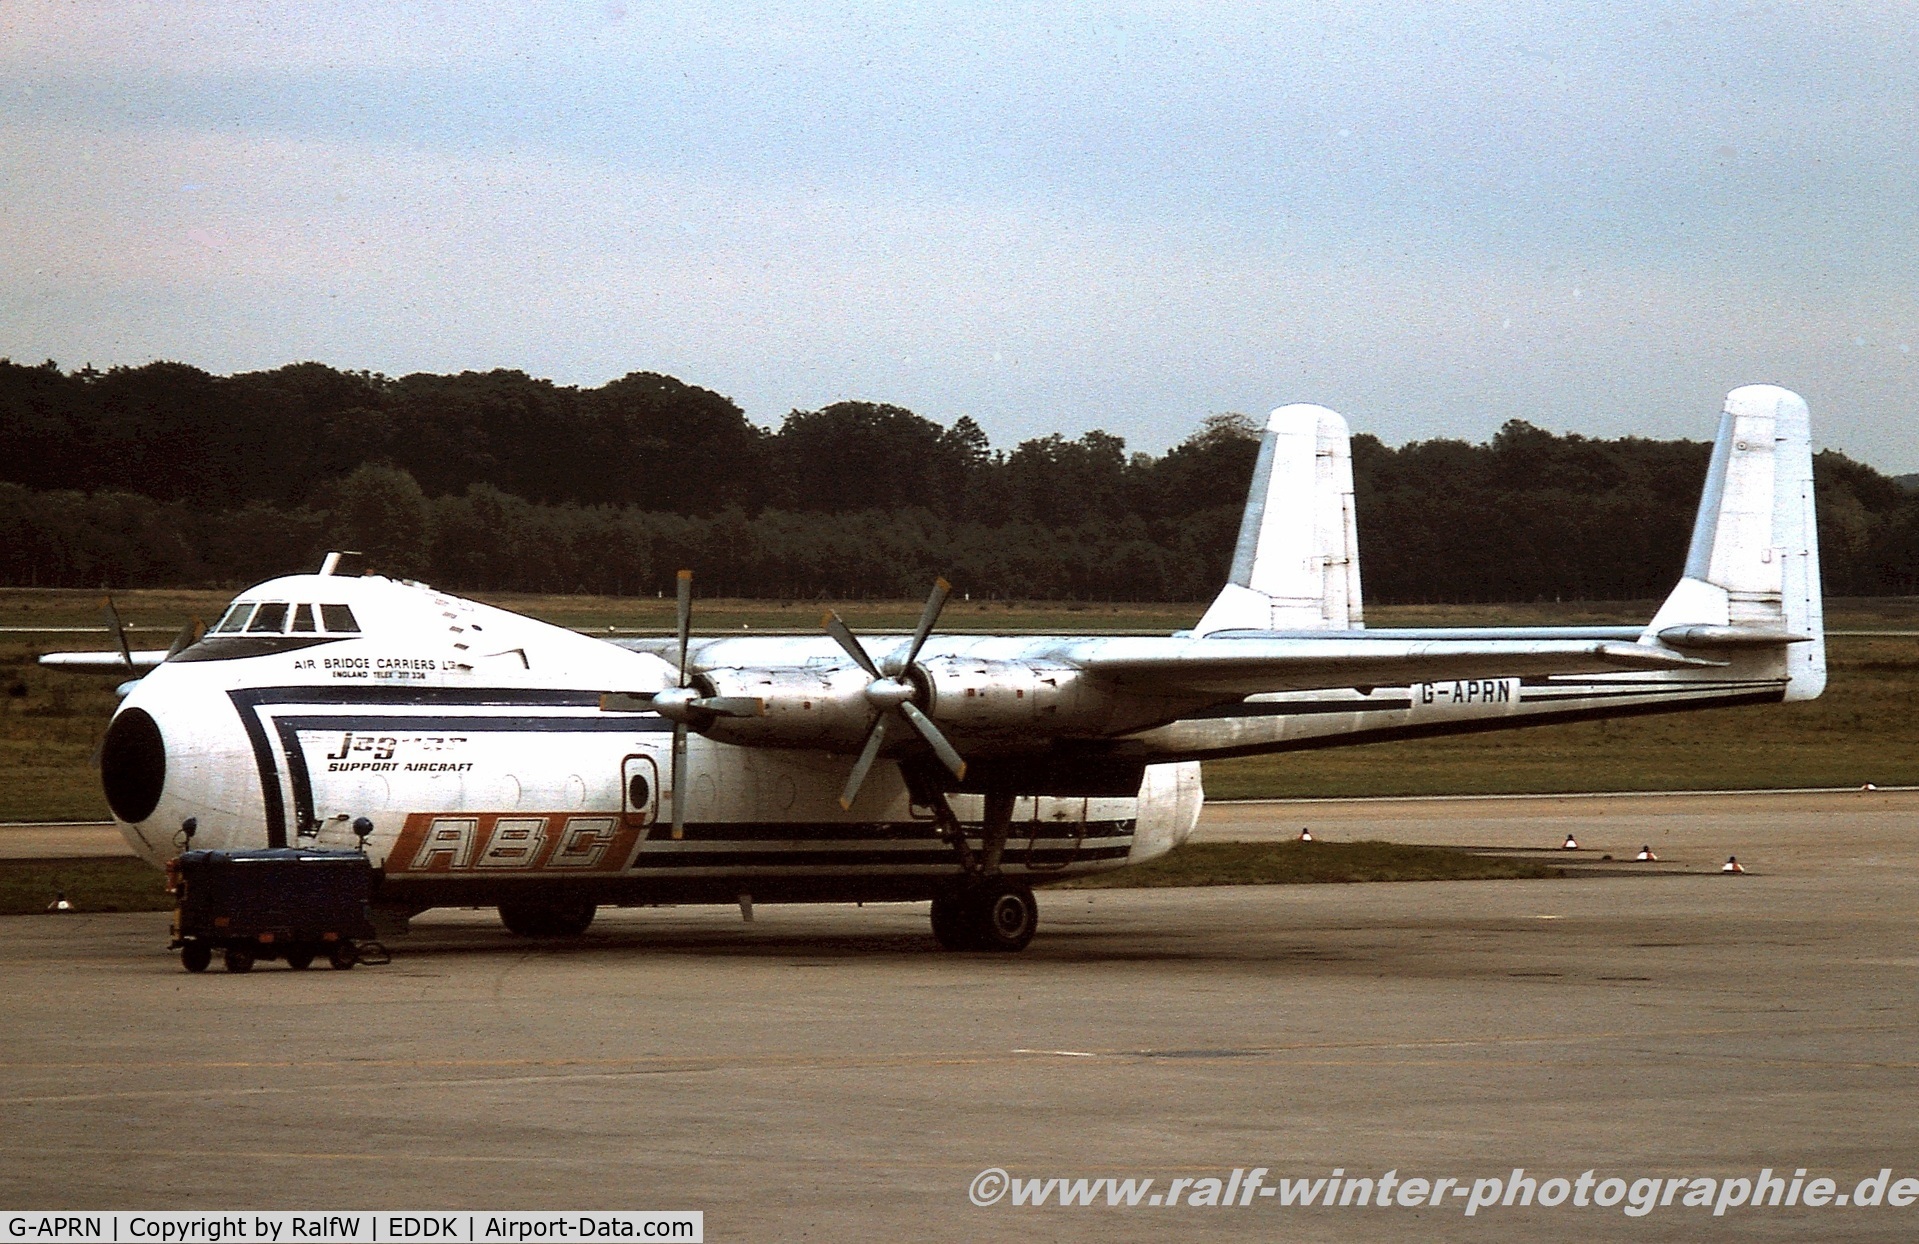 G-APRN, 1959 Armstrong Whitworth AW650 Argosy 101 C/N 6654, Armstrong Whitworth AW 650-101 Argosy - Air Bridge Carriers - G-APRN - 1977 - CGN, from a slide